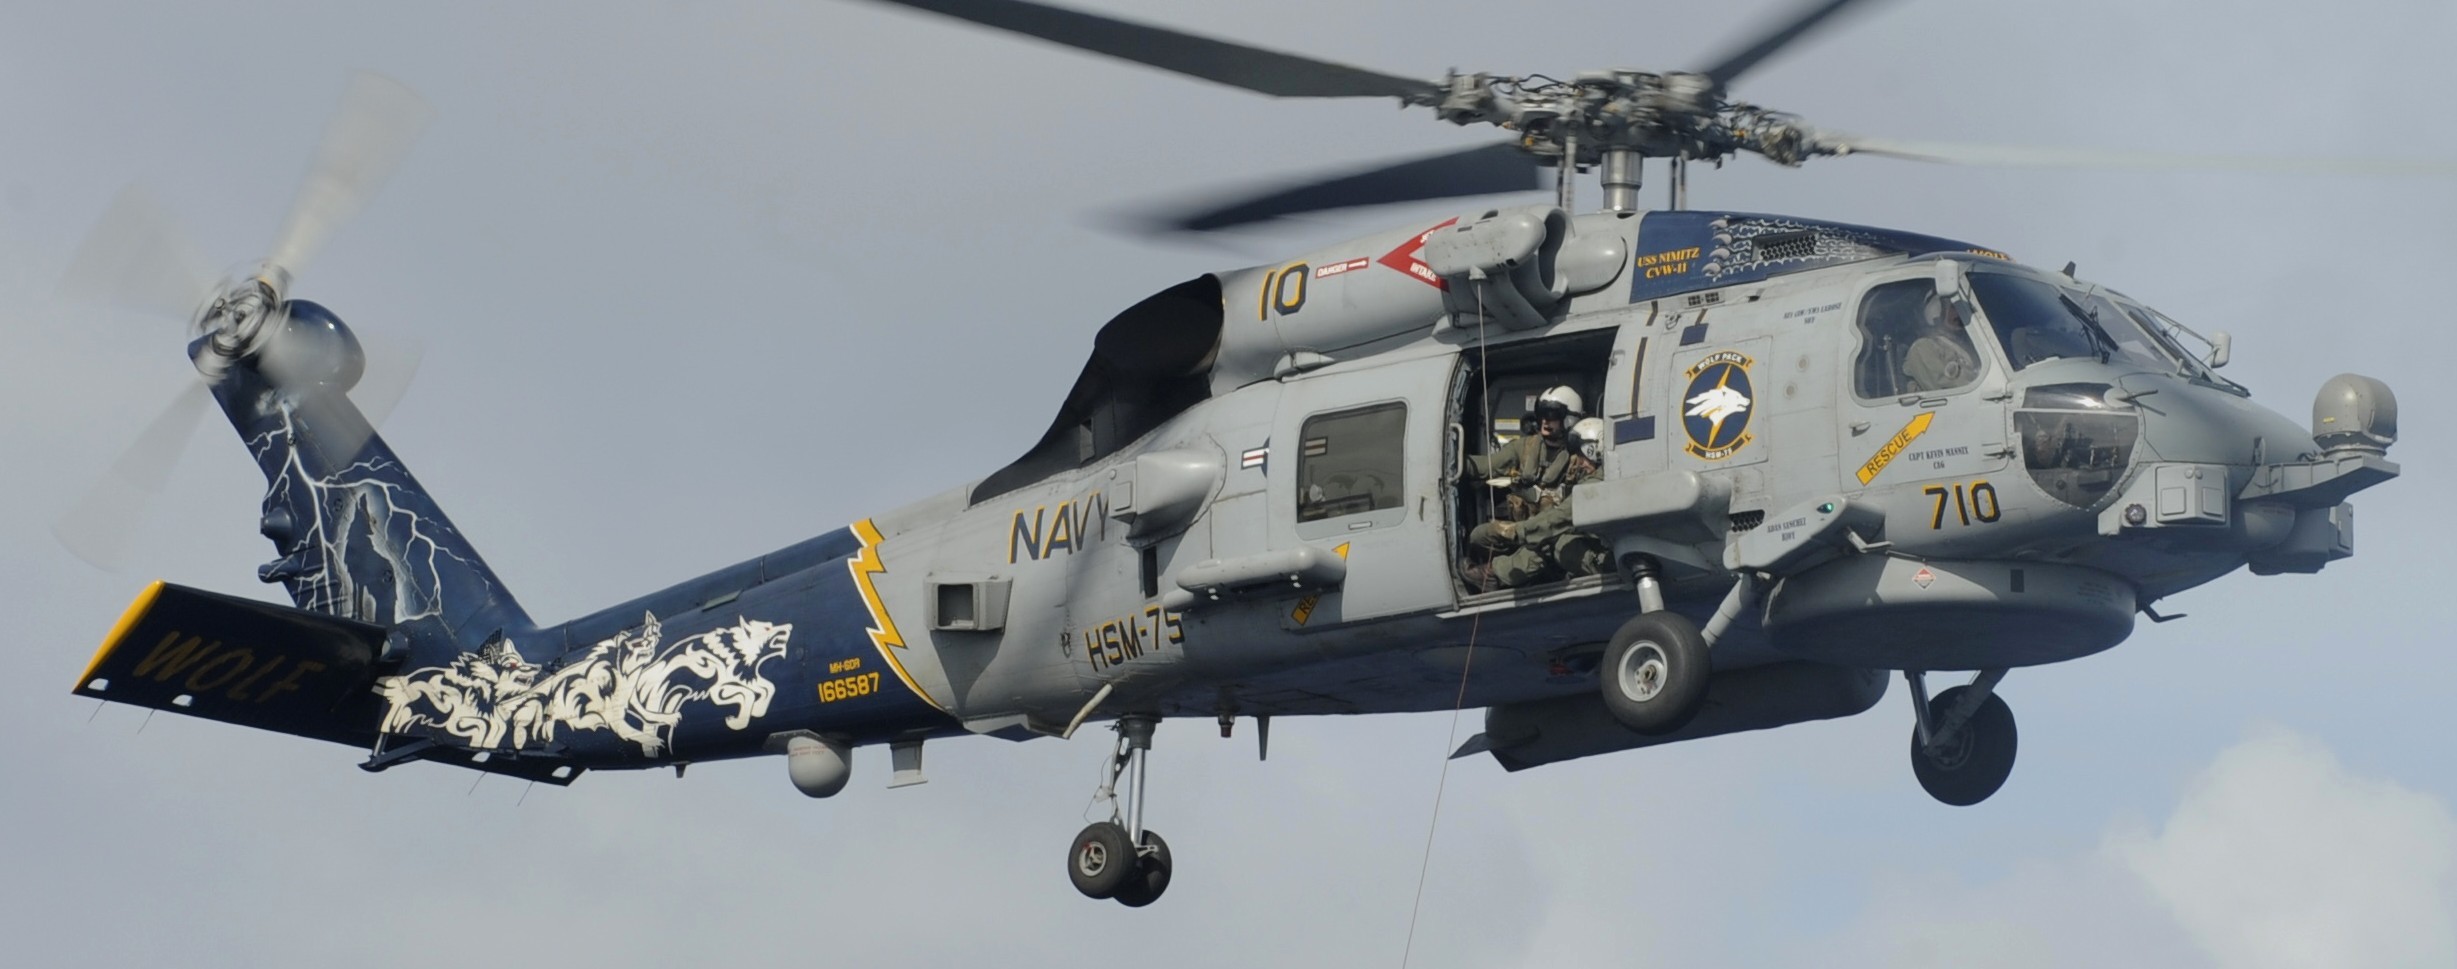 hsm-75 wolfpack helicopter maritime strike squadron us navy mh-60r seahawk 2013 53